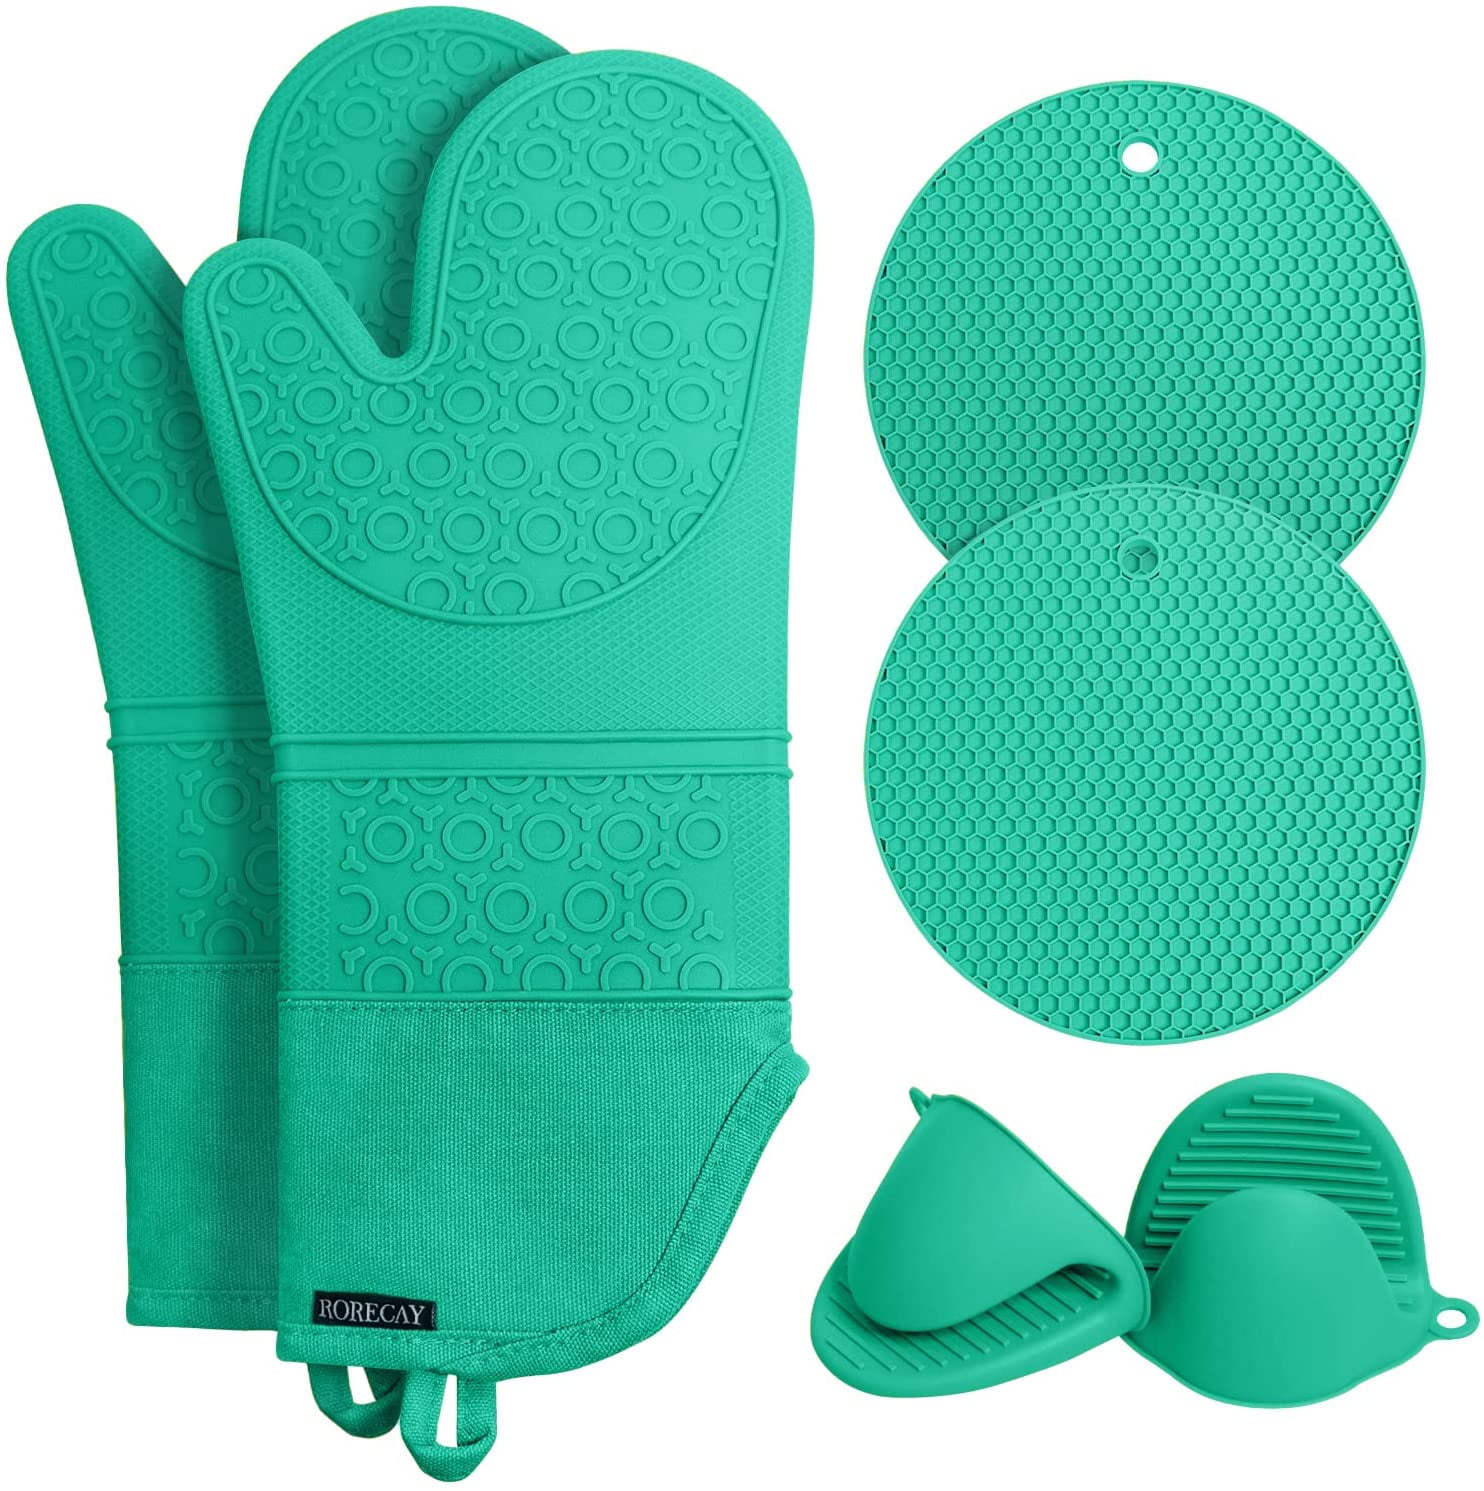 Oven Mitts and Pot Holders Set 6pcs, Kitchen Oven Glove,High Heat Resistant  550 Degree Extra Long Oven Mitts and Potholder with Non-Slip Silicone  Surface for Cooking Baking Grilling… - Coupon Codes, Promo